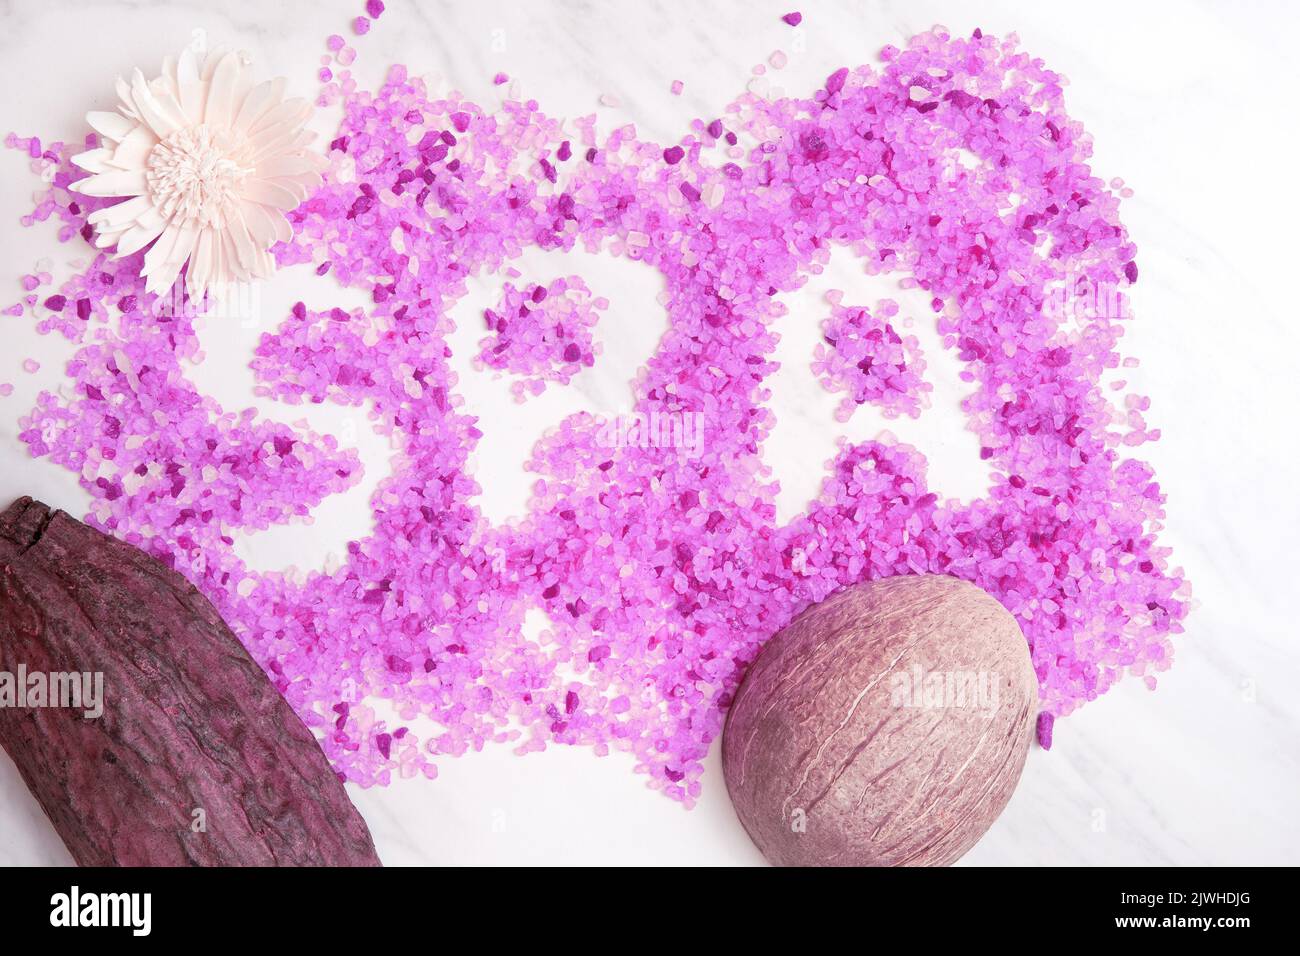 Spa word of the bath salt on the marble table with coconut and cacao bean. Spa salon backgrounds and templates Stock Photo